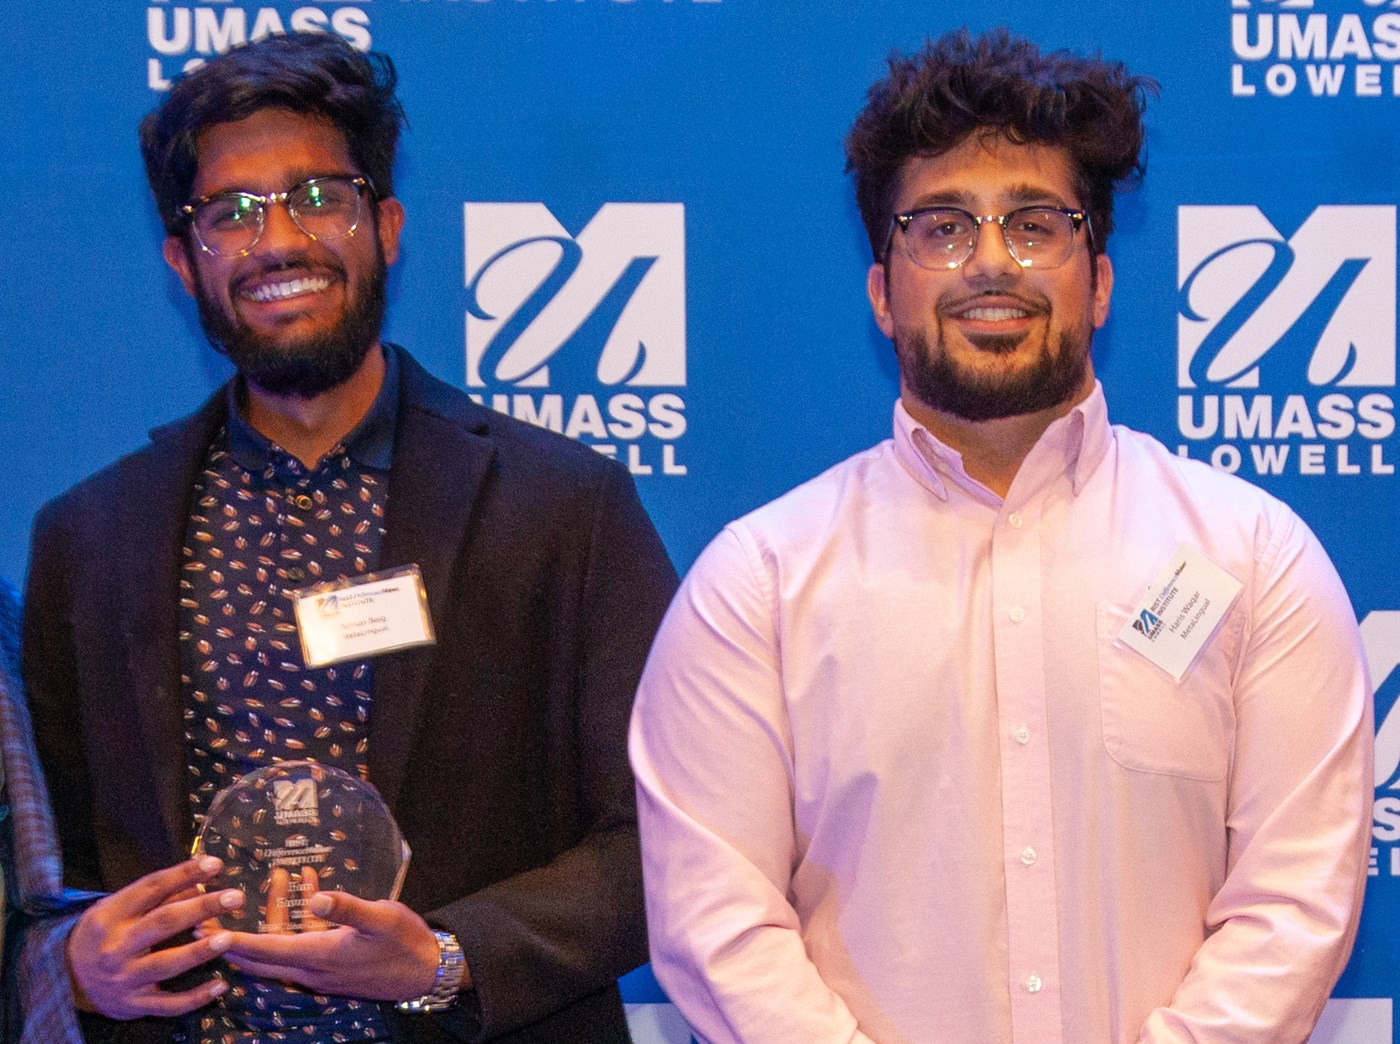 2 male students from the MetaLingual team holding an award and posing against a blue UMass Lowell backdrop.